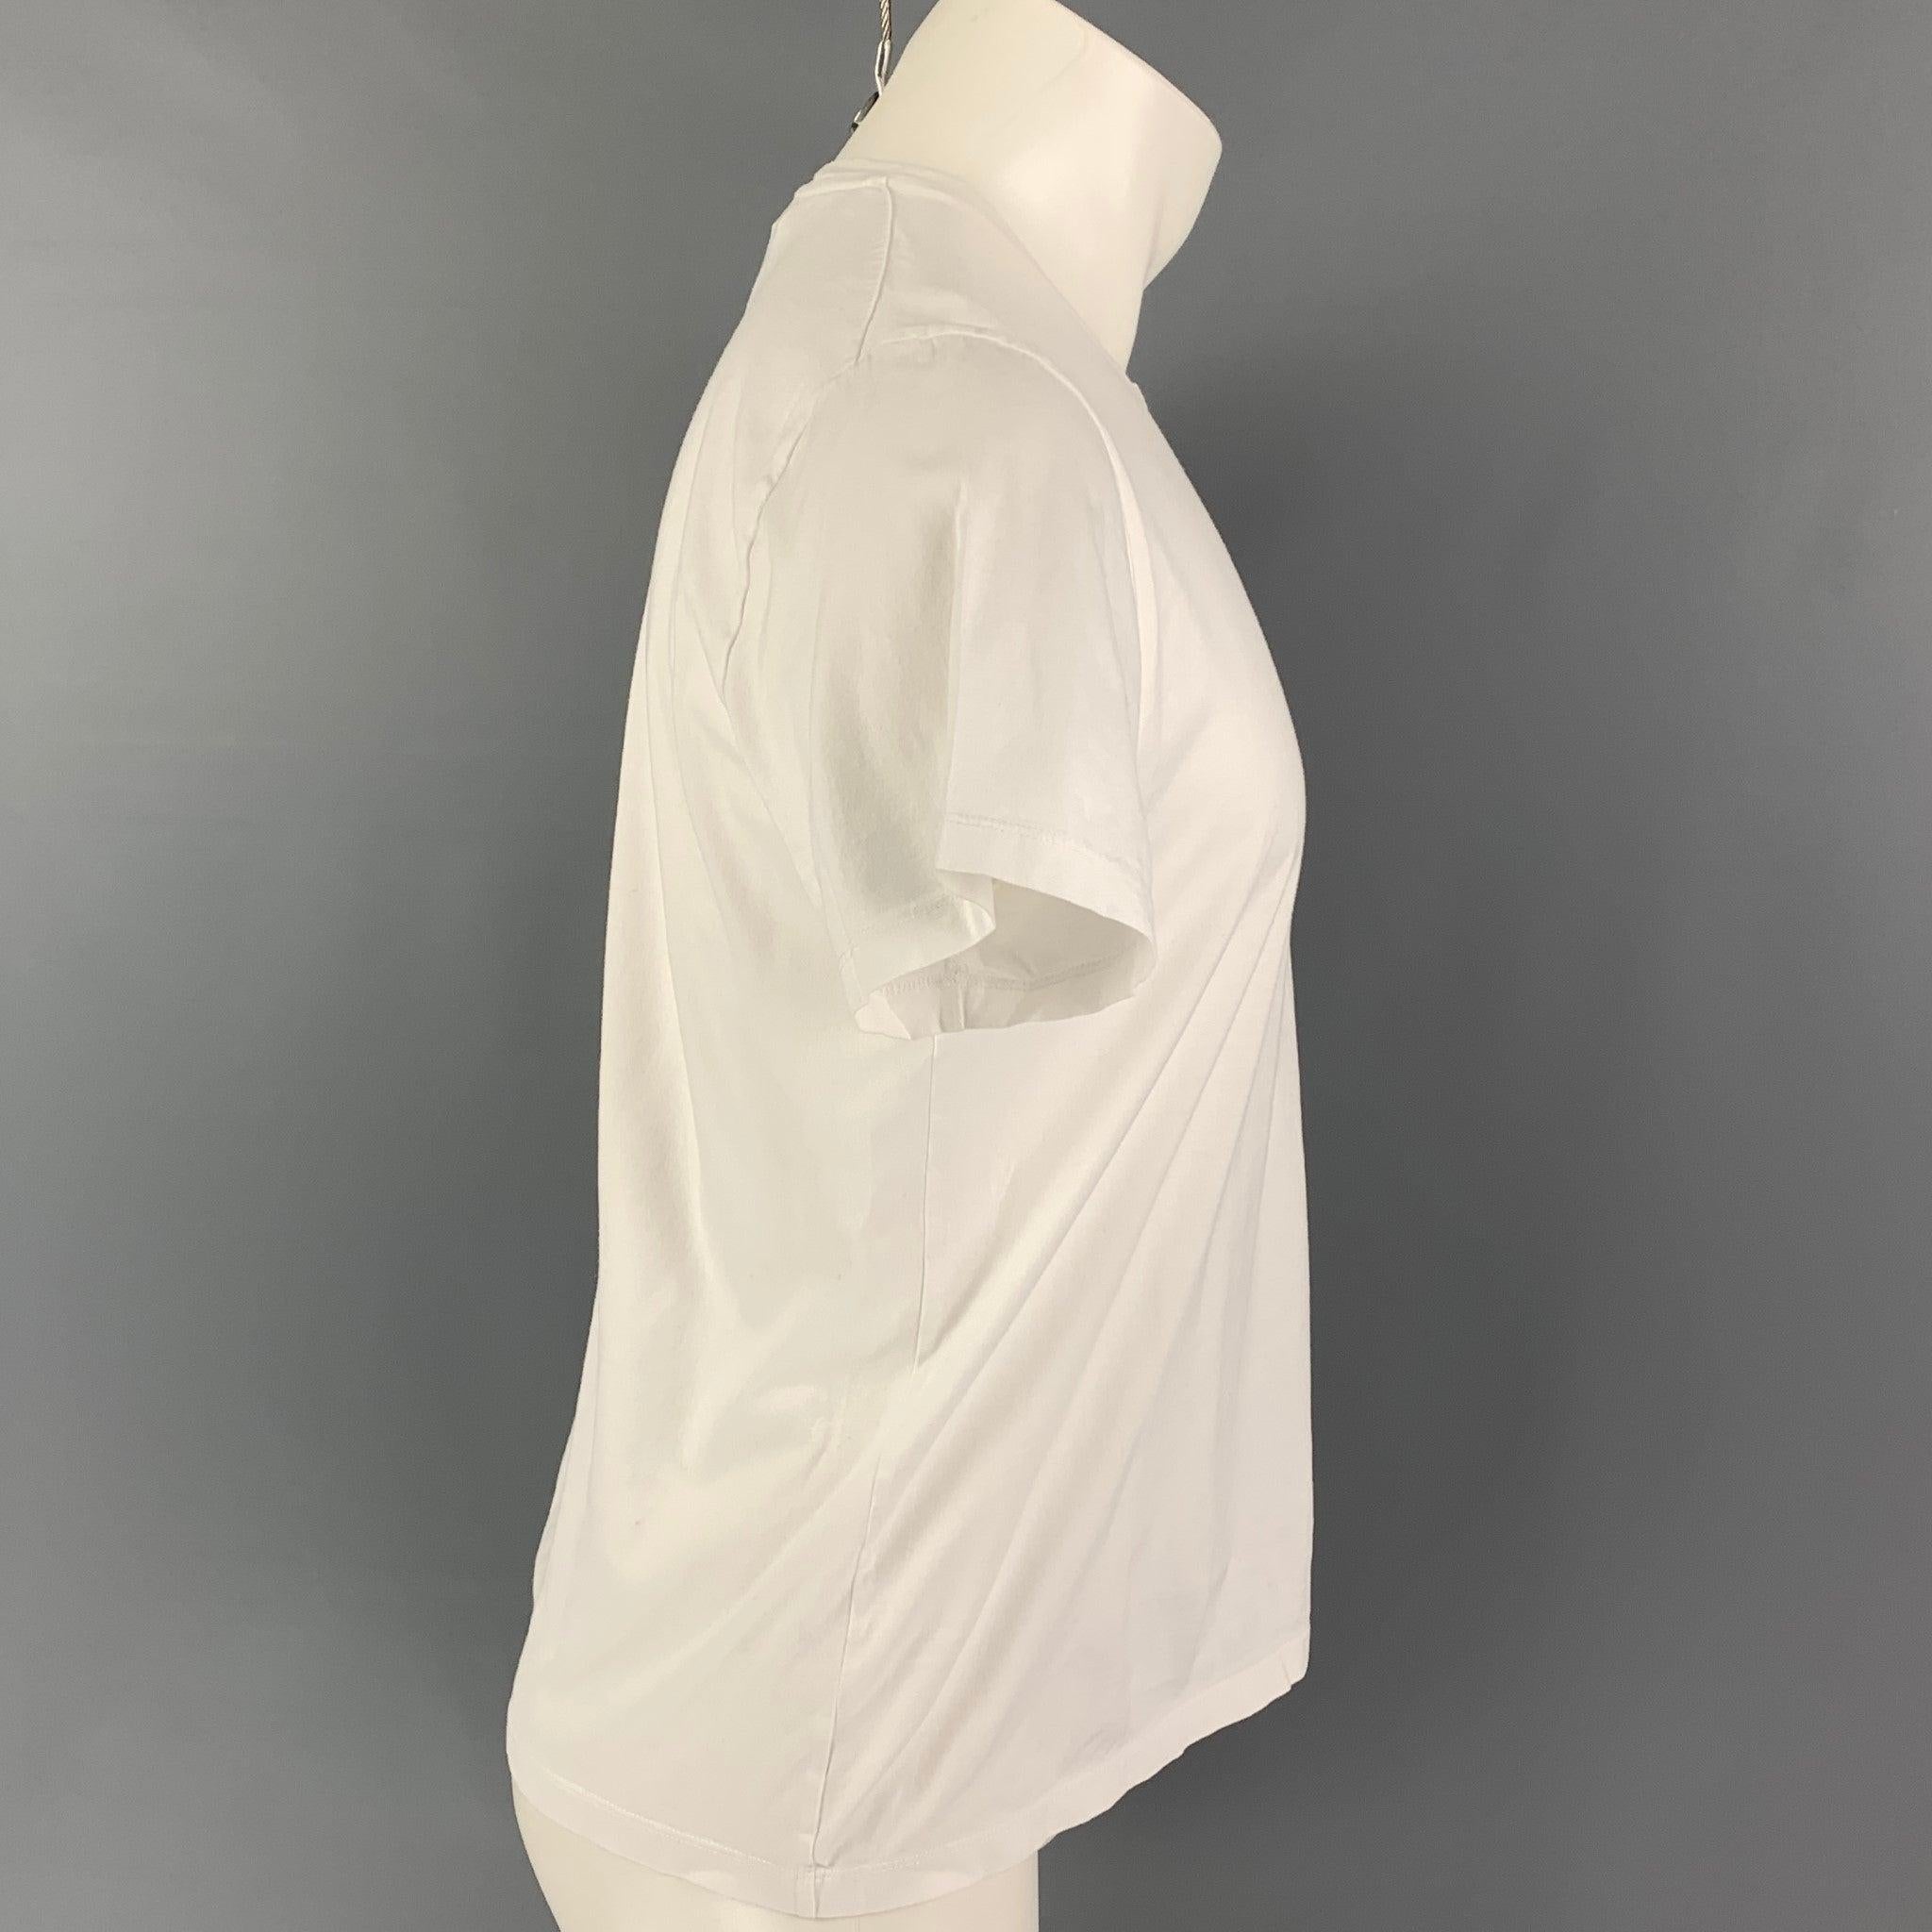 JIL SANDER t-shirt comes in white cotton featuring a slim fit and a crew-neck.
Good
Pre-Owned Condition. Light wear. As-is. 

Marked:   XL
  

Measurements: 
 
Shoulder: 17 inches Chest: 38 inches Sleeve: 8 inches Length: 24.5 inches 
  
  
